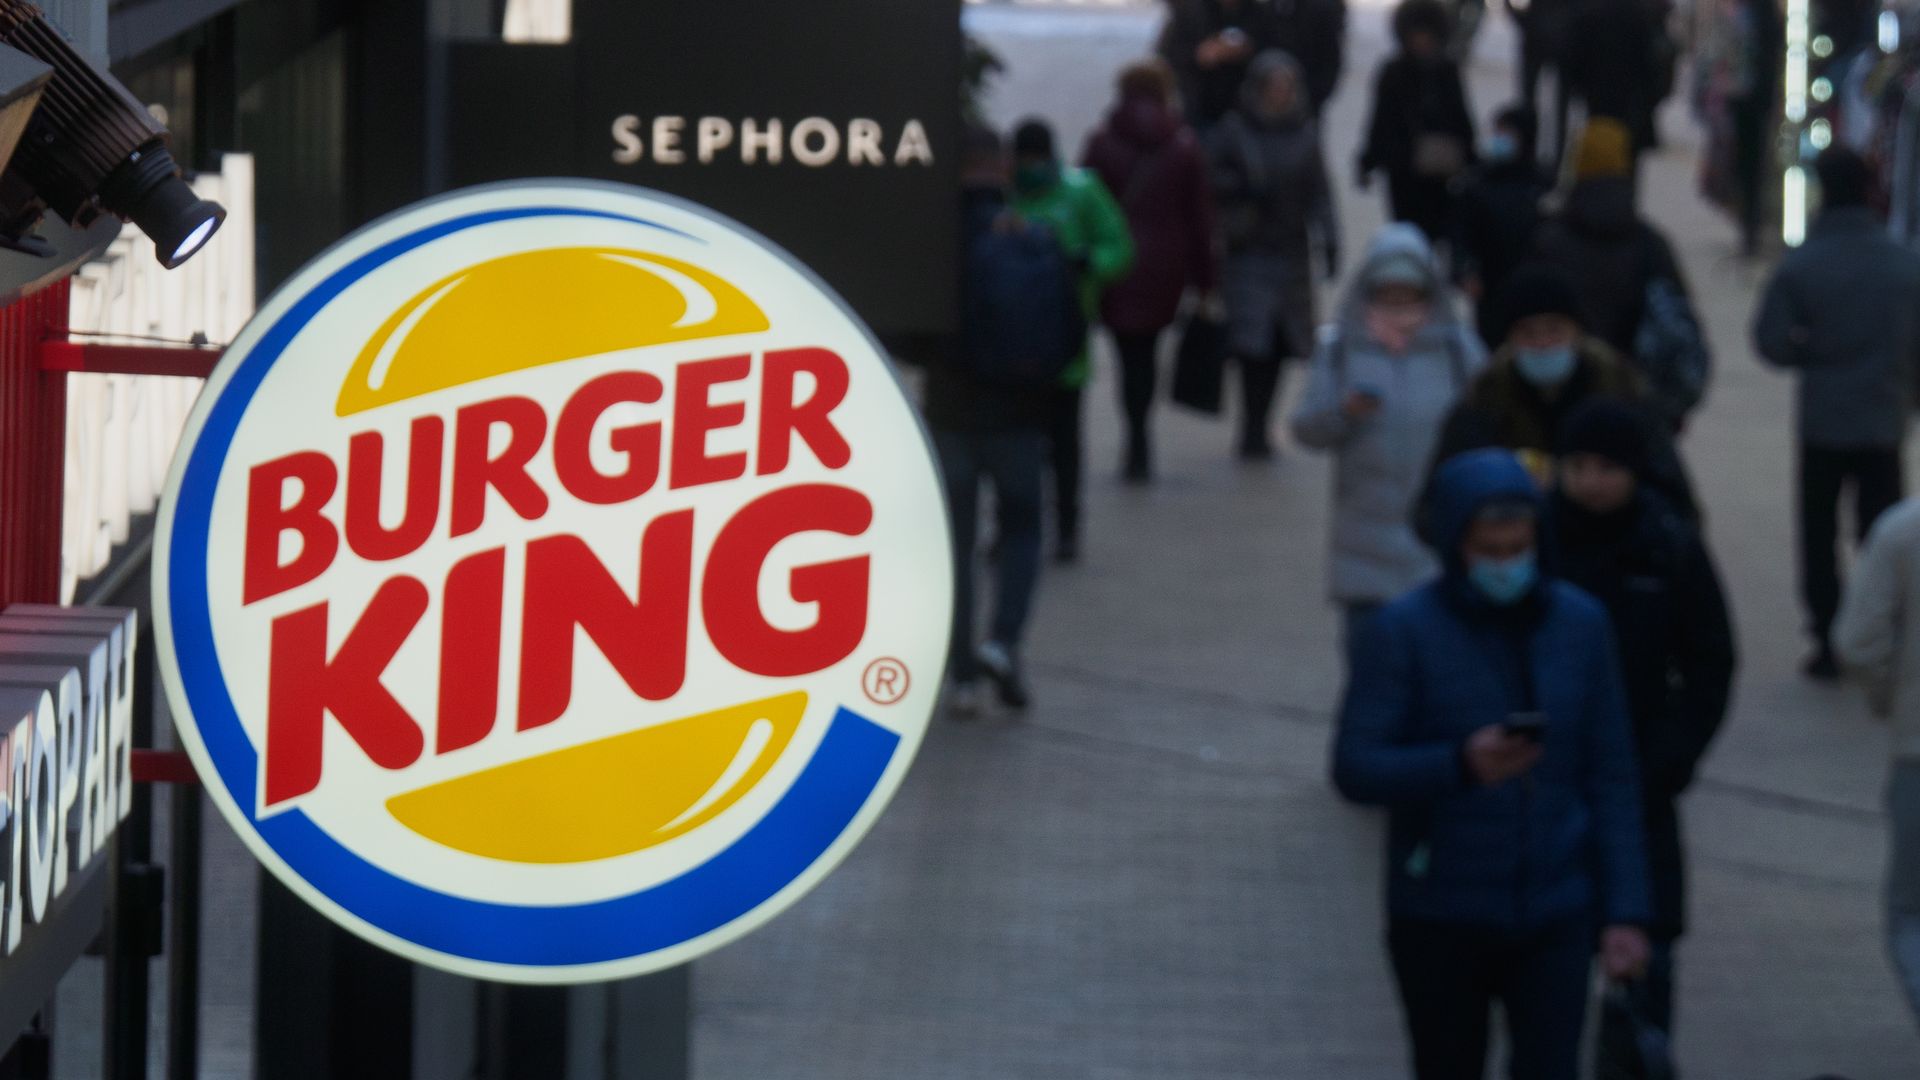 Fast food restaurant chain Burger King has suspended all of its corporate support for the Russian market.